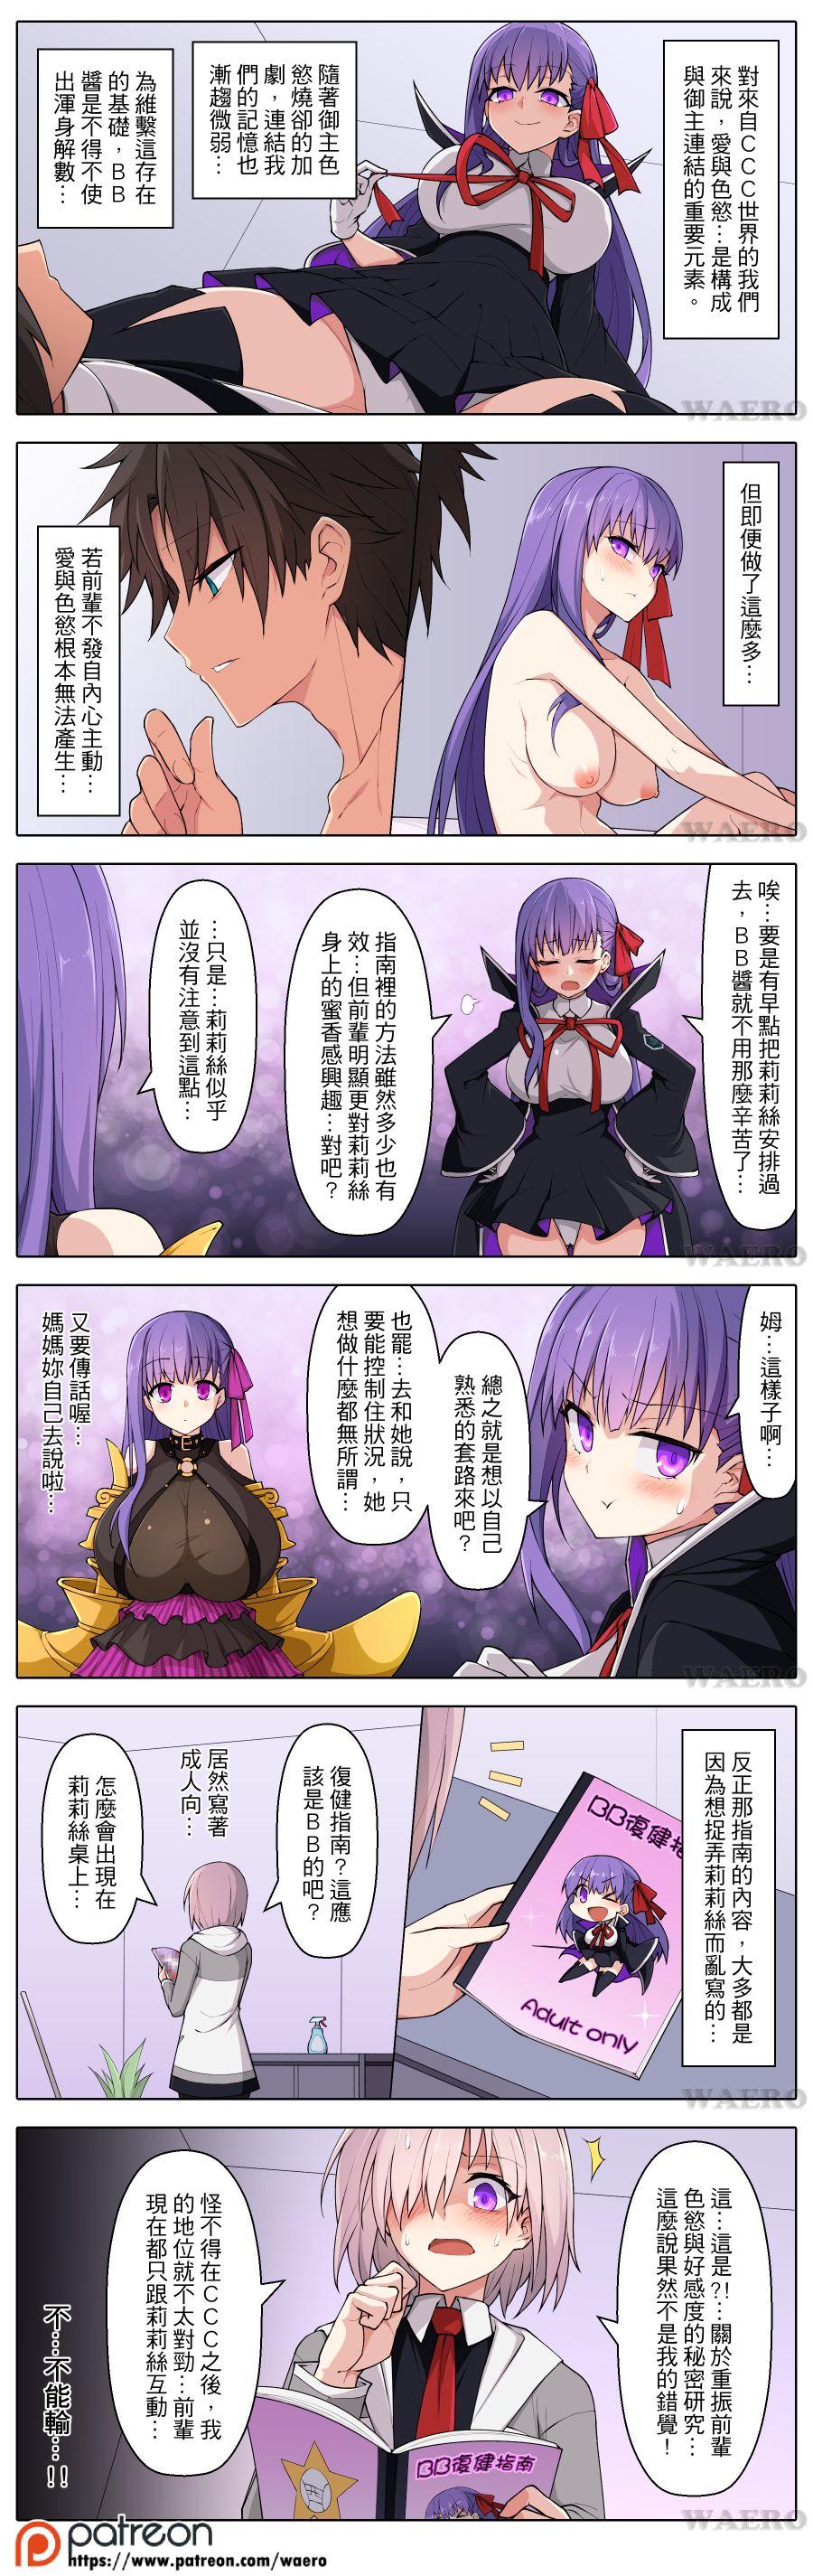 Nudes Lust Grand Order - Fate grand order Amatuer Sex - Page 4